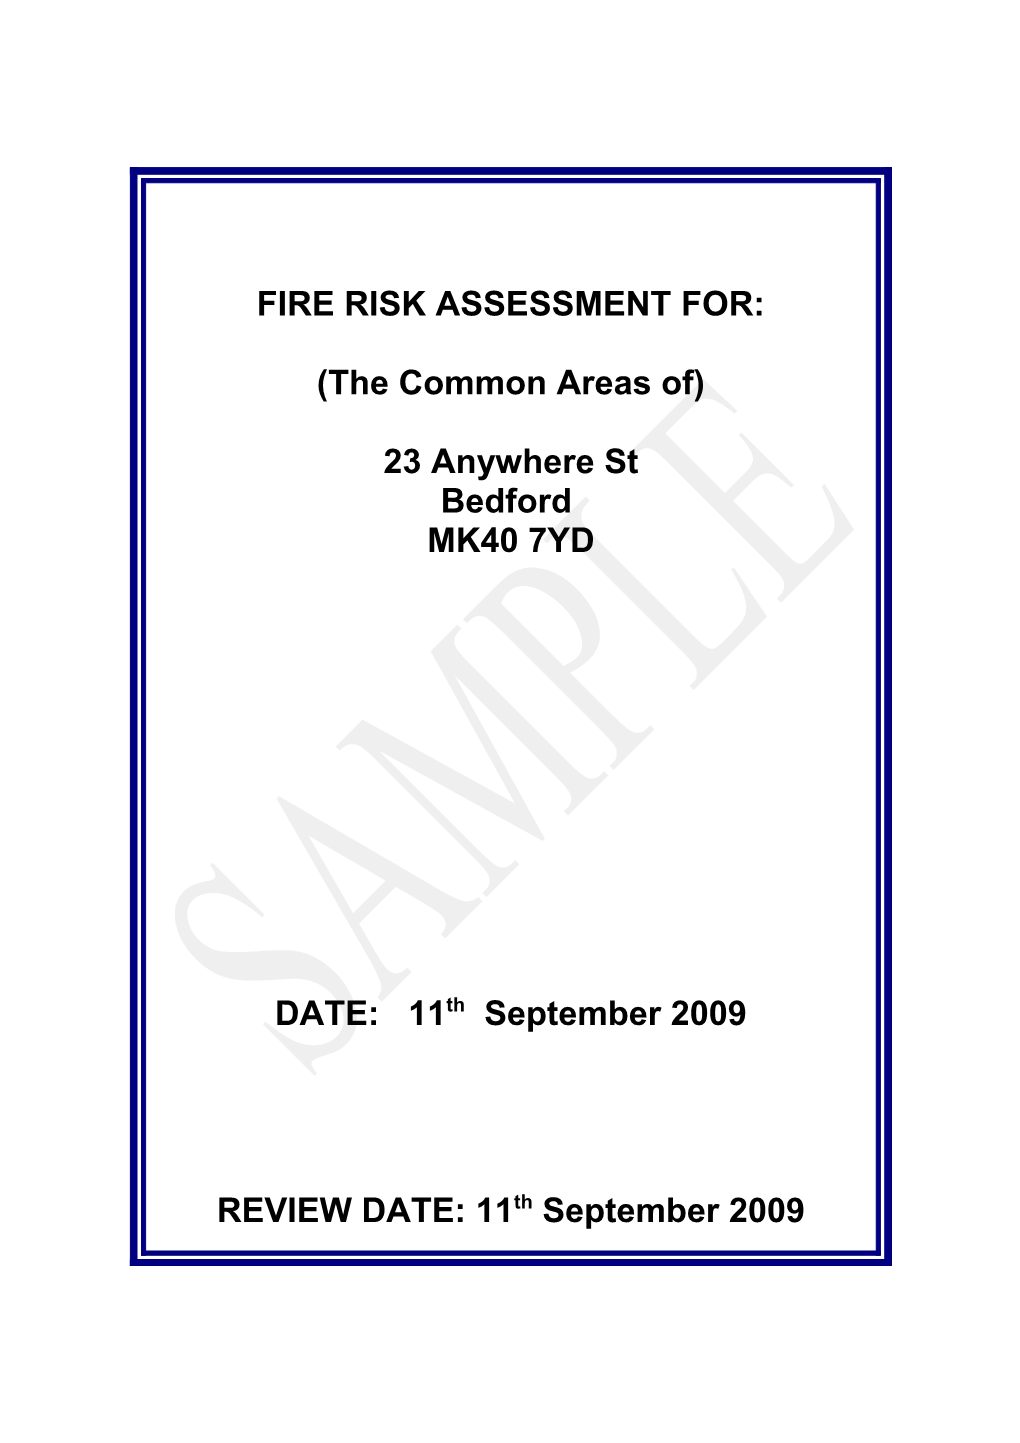 Example of Risk Assessment for Rented Property